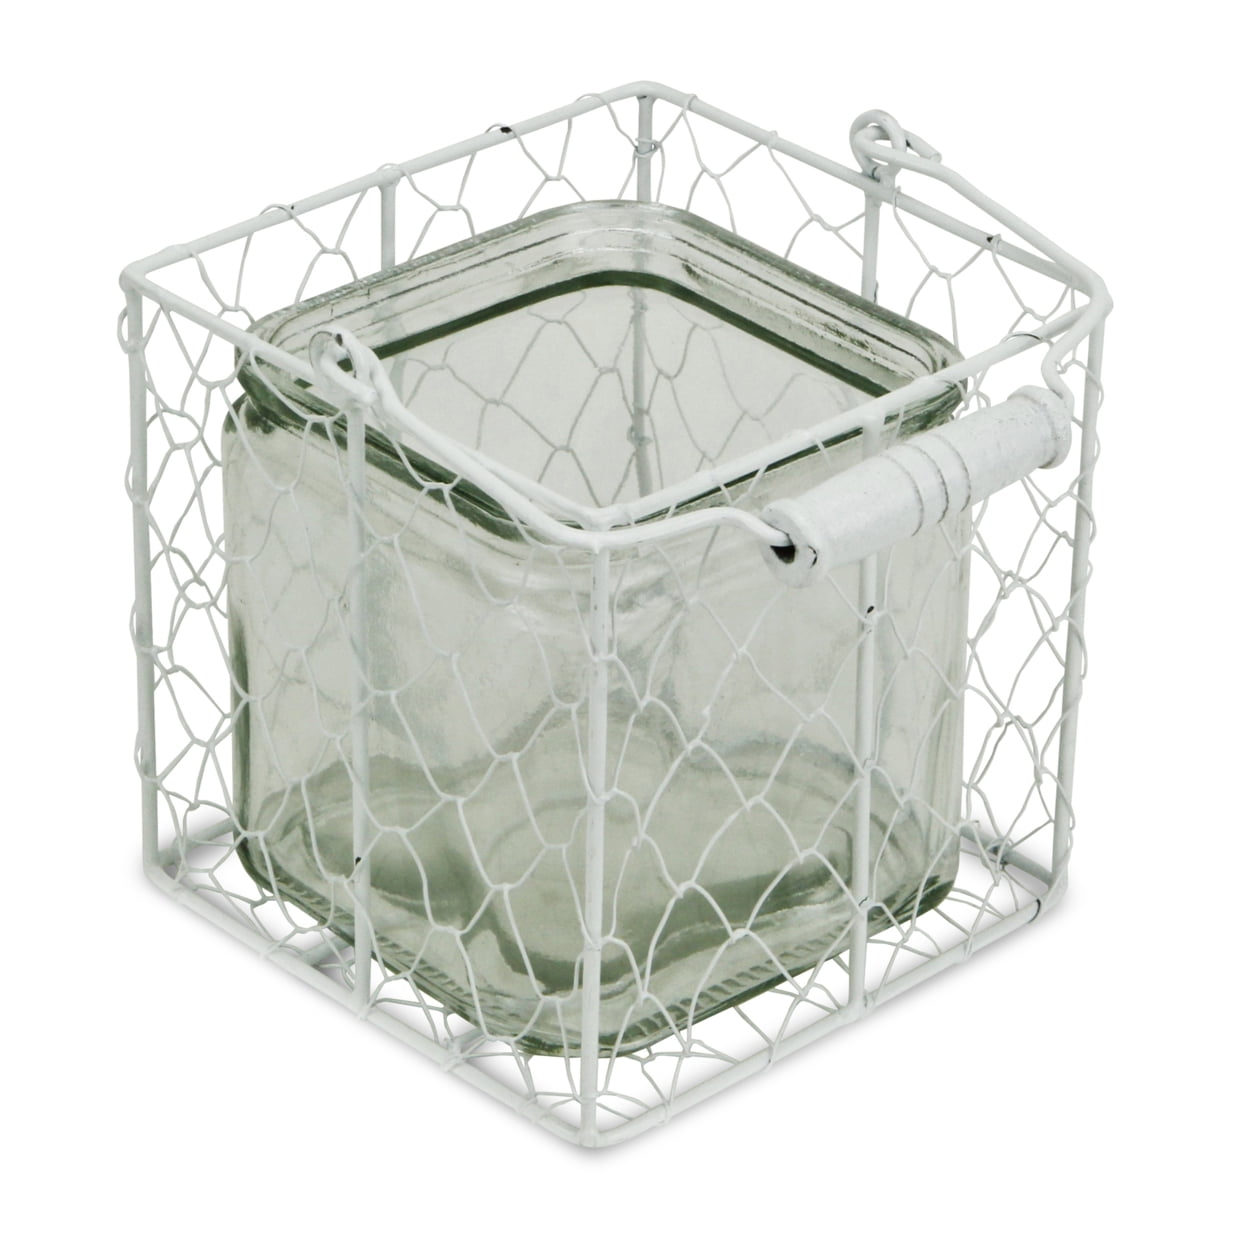 15s002wl Square Glass Jar In Wire Basket, White - Large